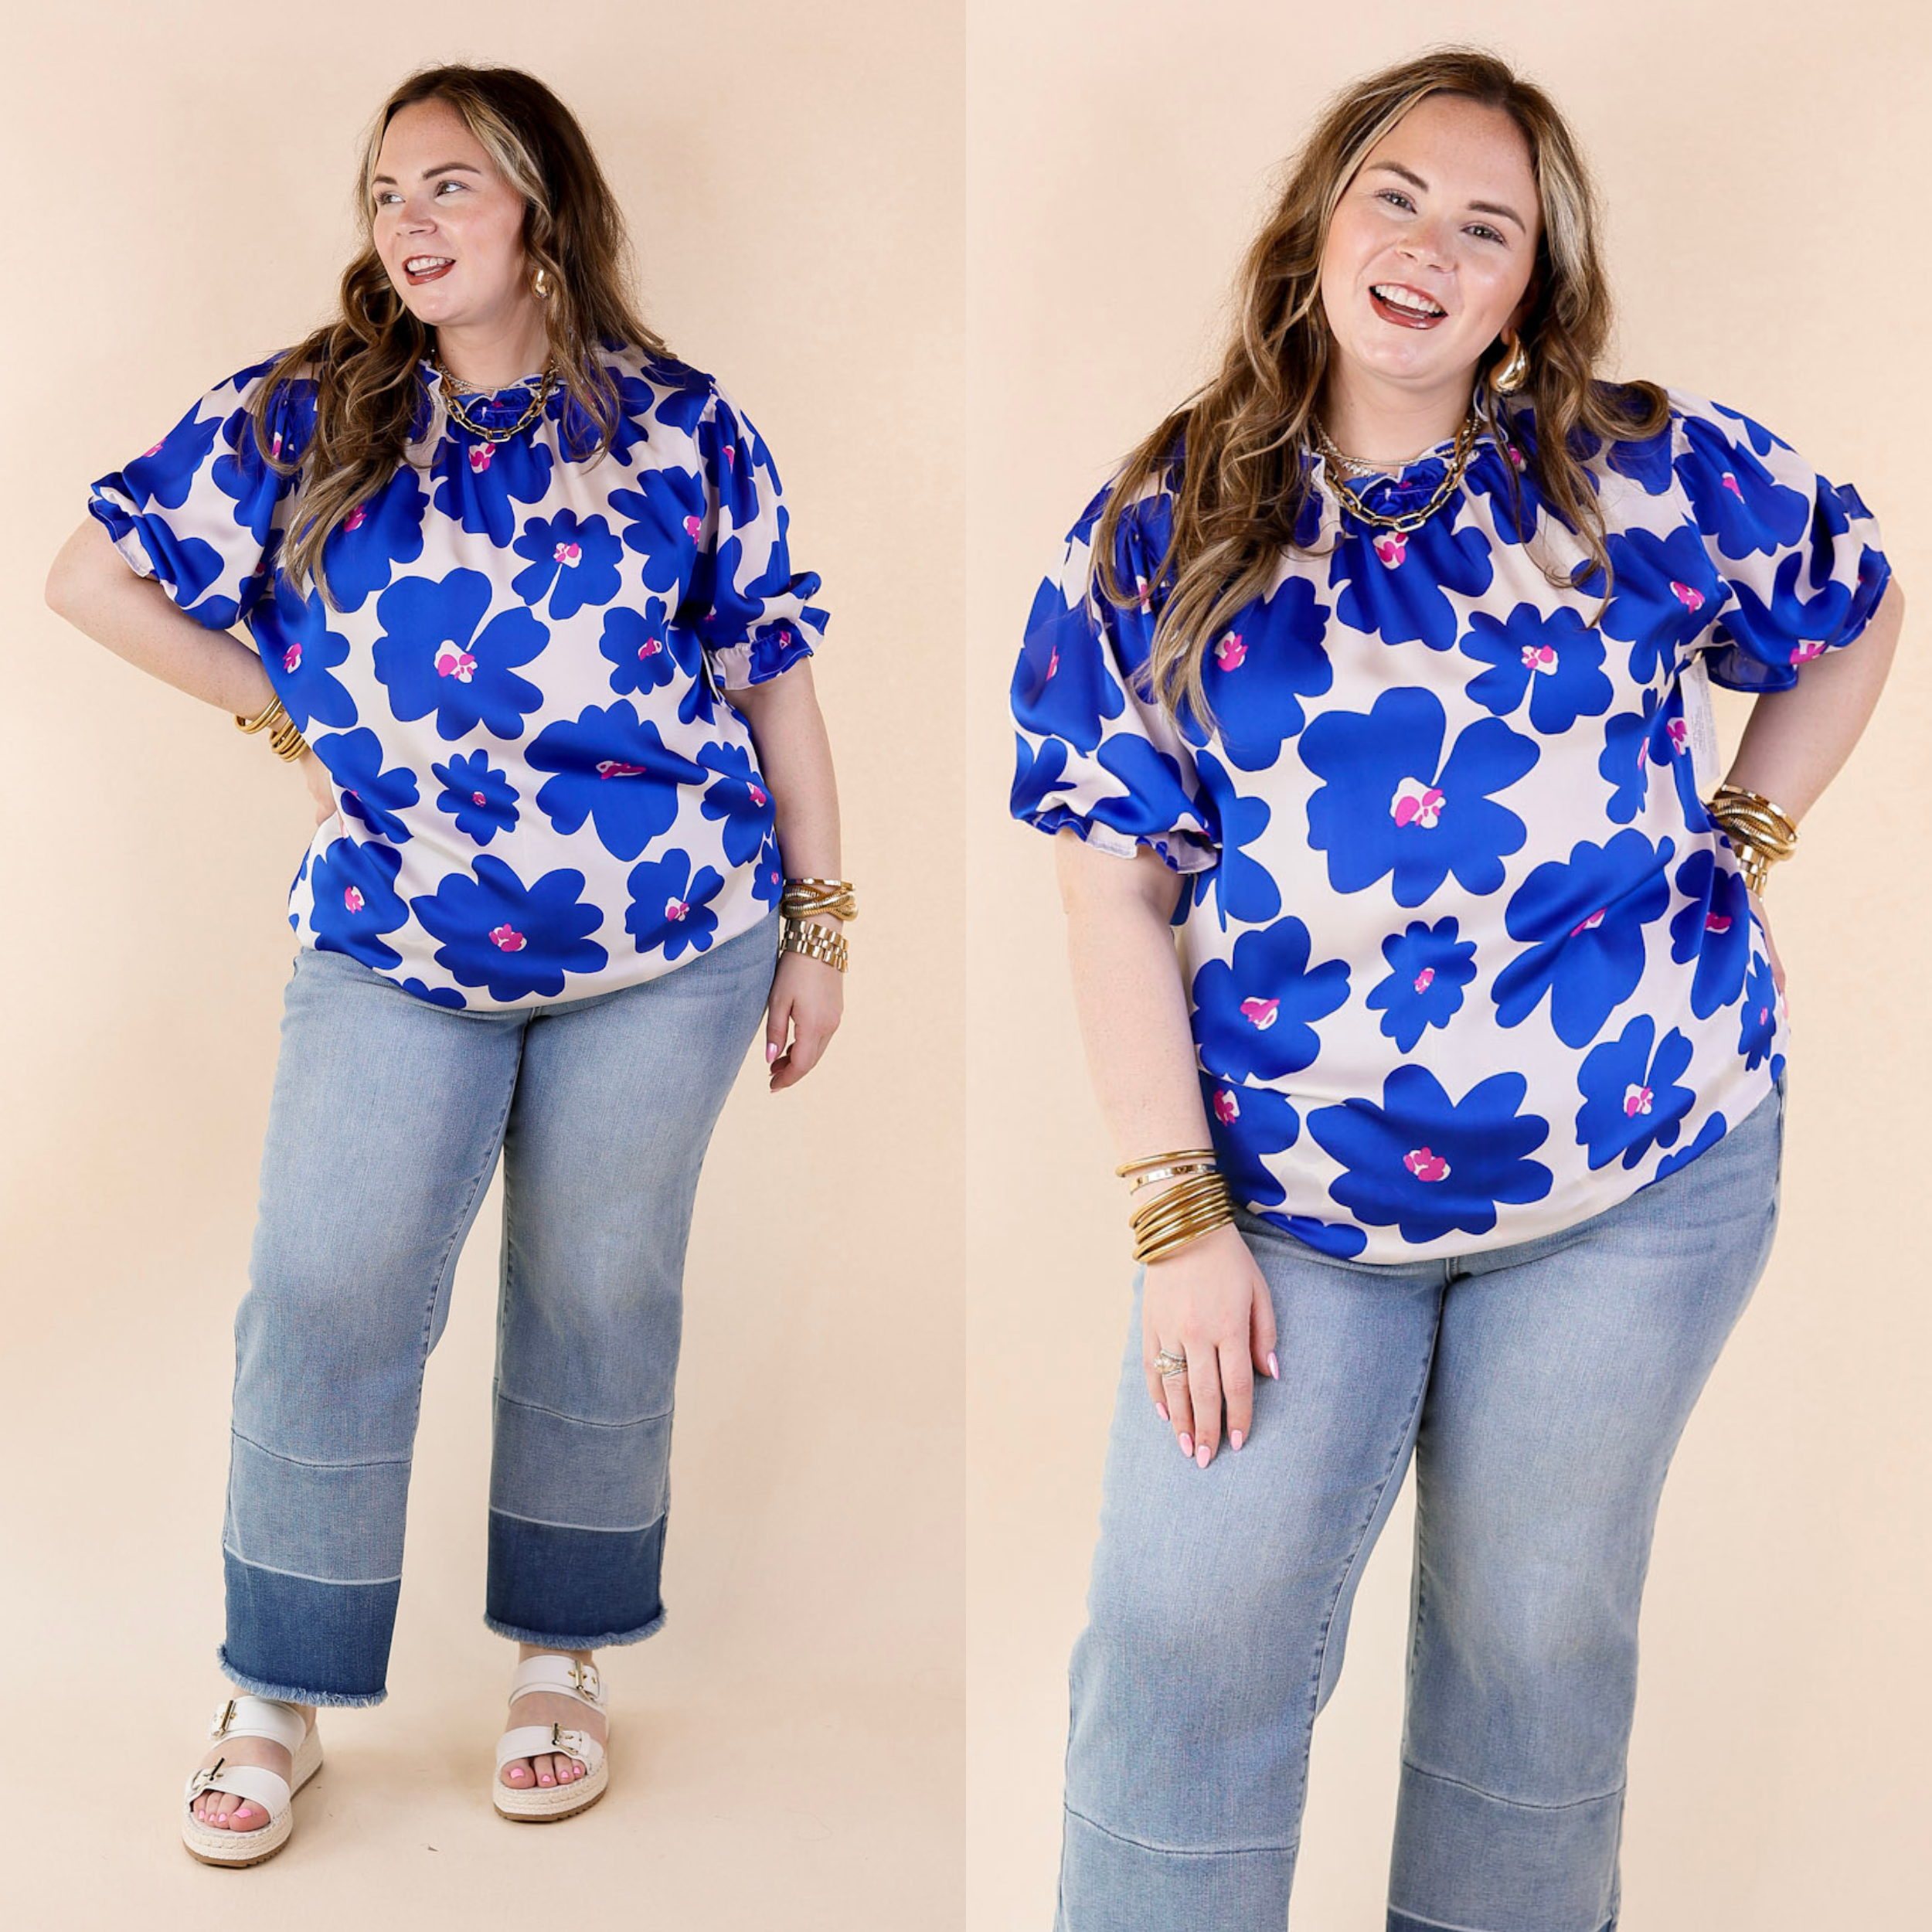 Divine Design Floral Blouse With Puffed Sleeve and Ruffle Neckline in Cobalt Blue - Giddy Up Glamour Boutique